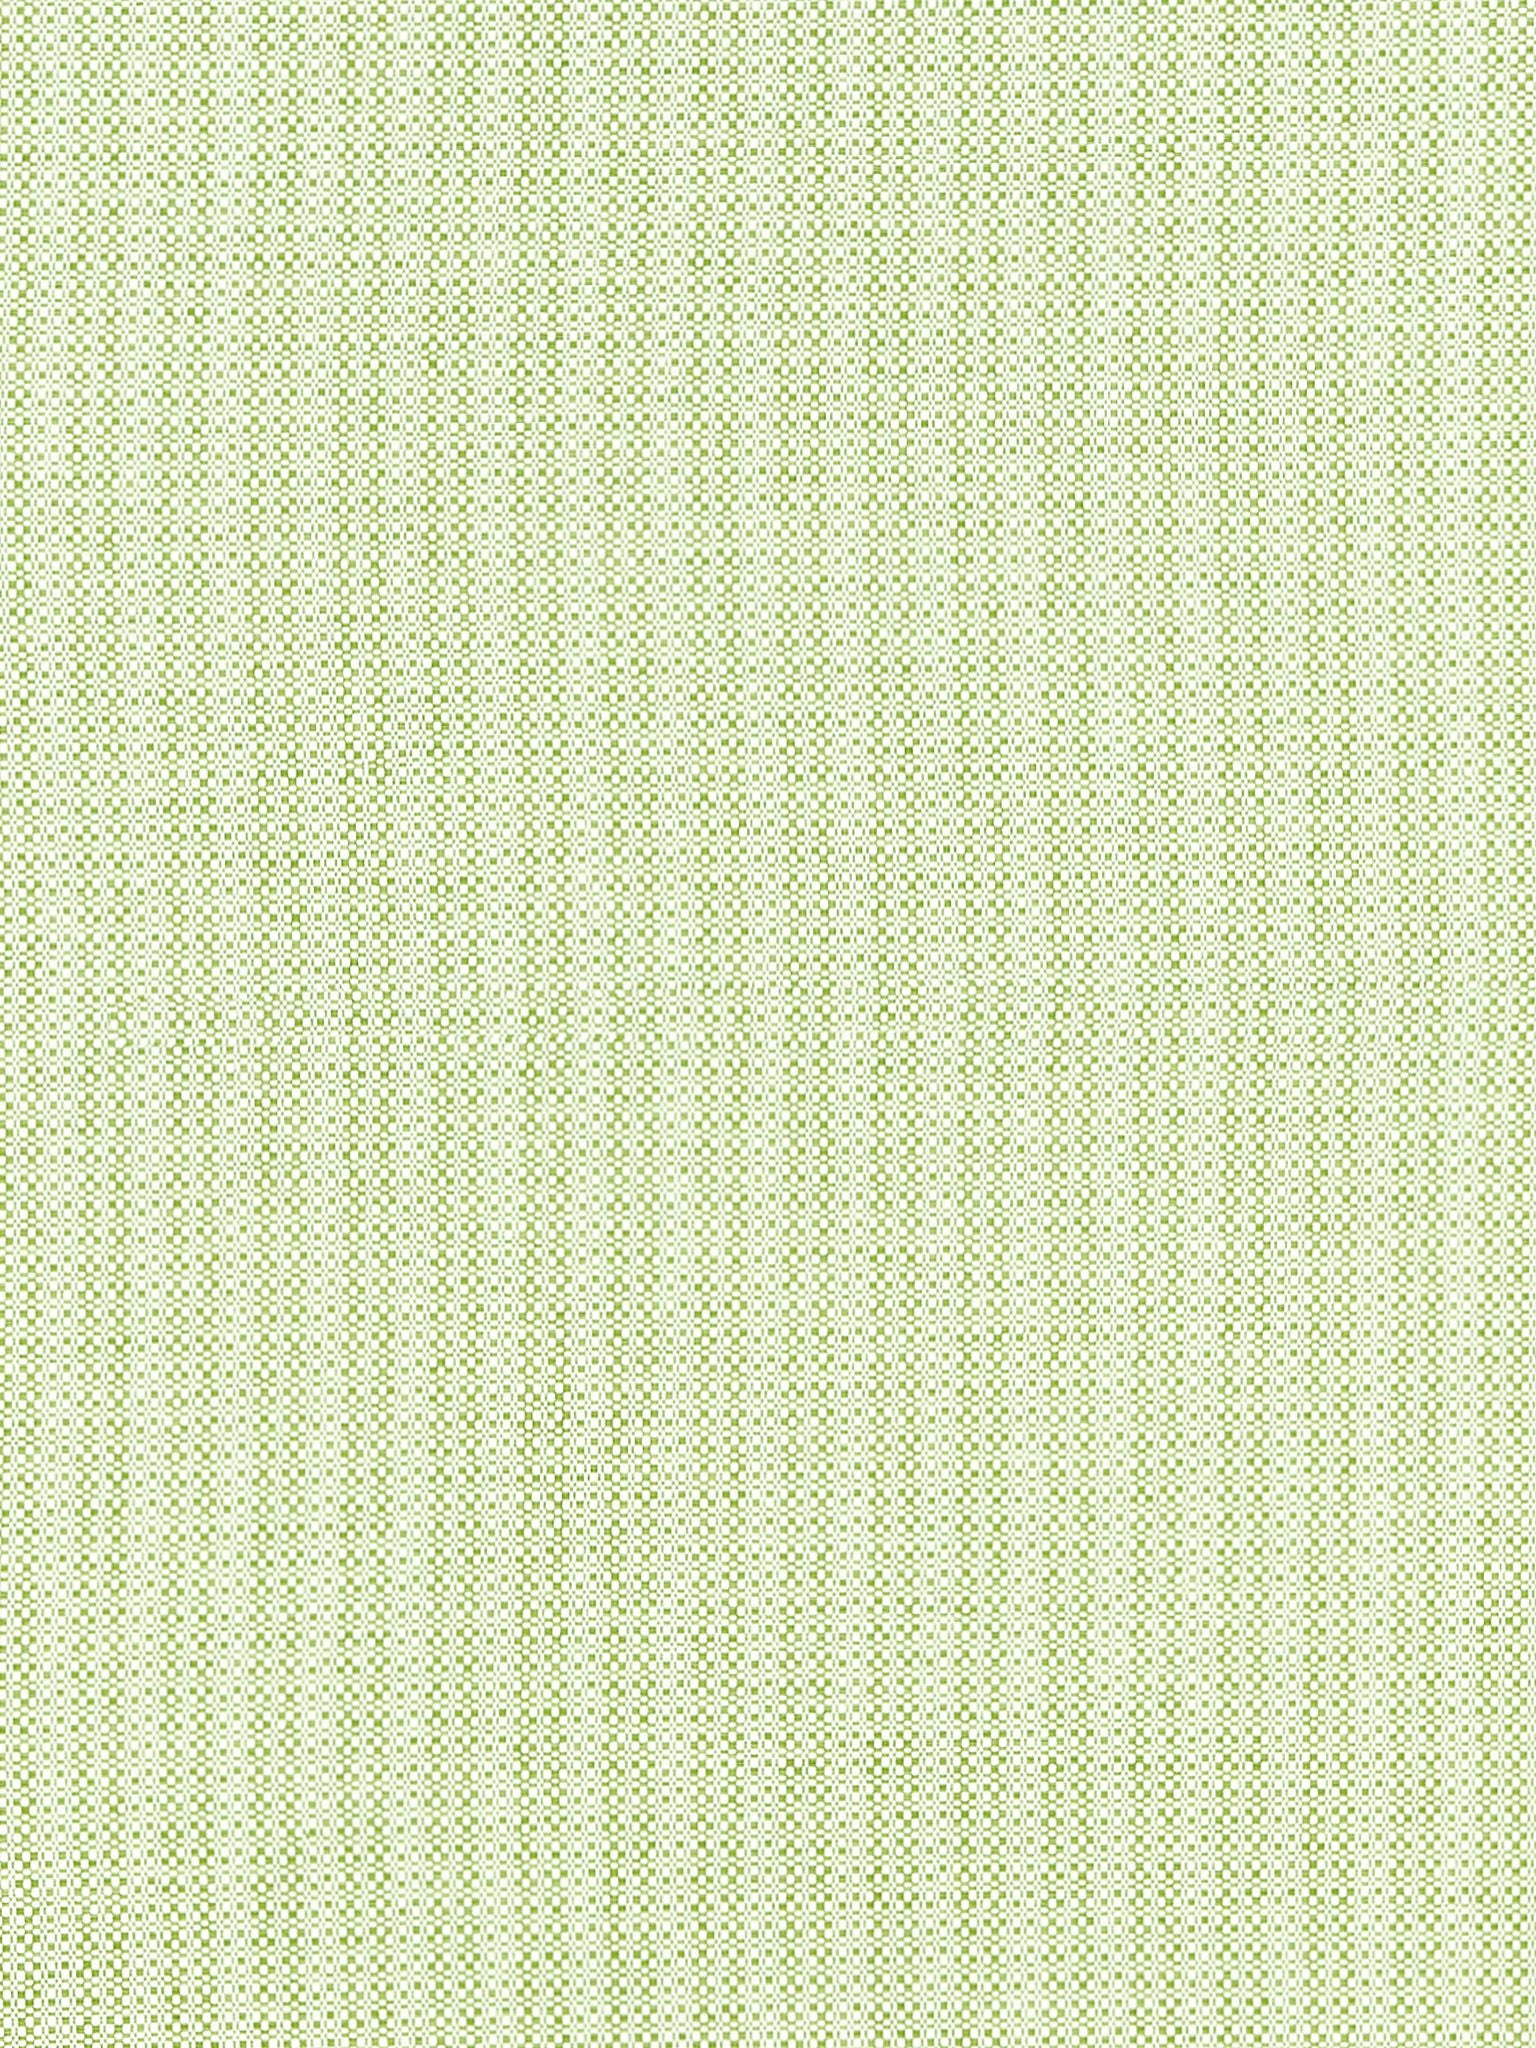 Tahiti Tweed fabric in palm color - pattern number SC 000227192 - by Scalamandre in the Scalamandre Fabrics Book 1 collection